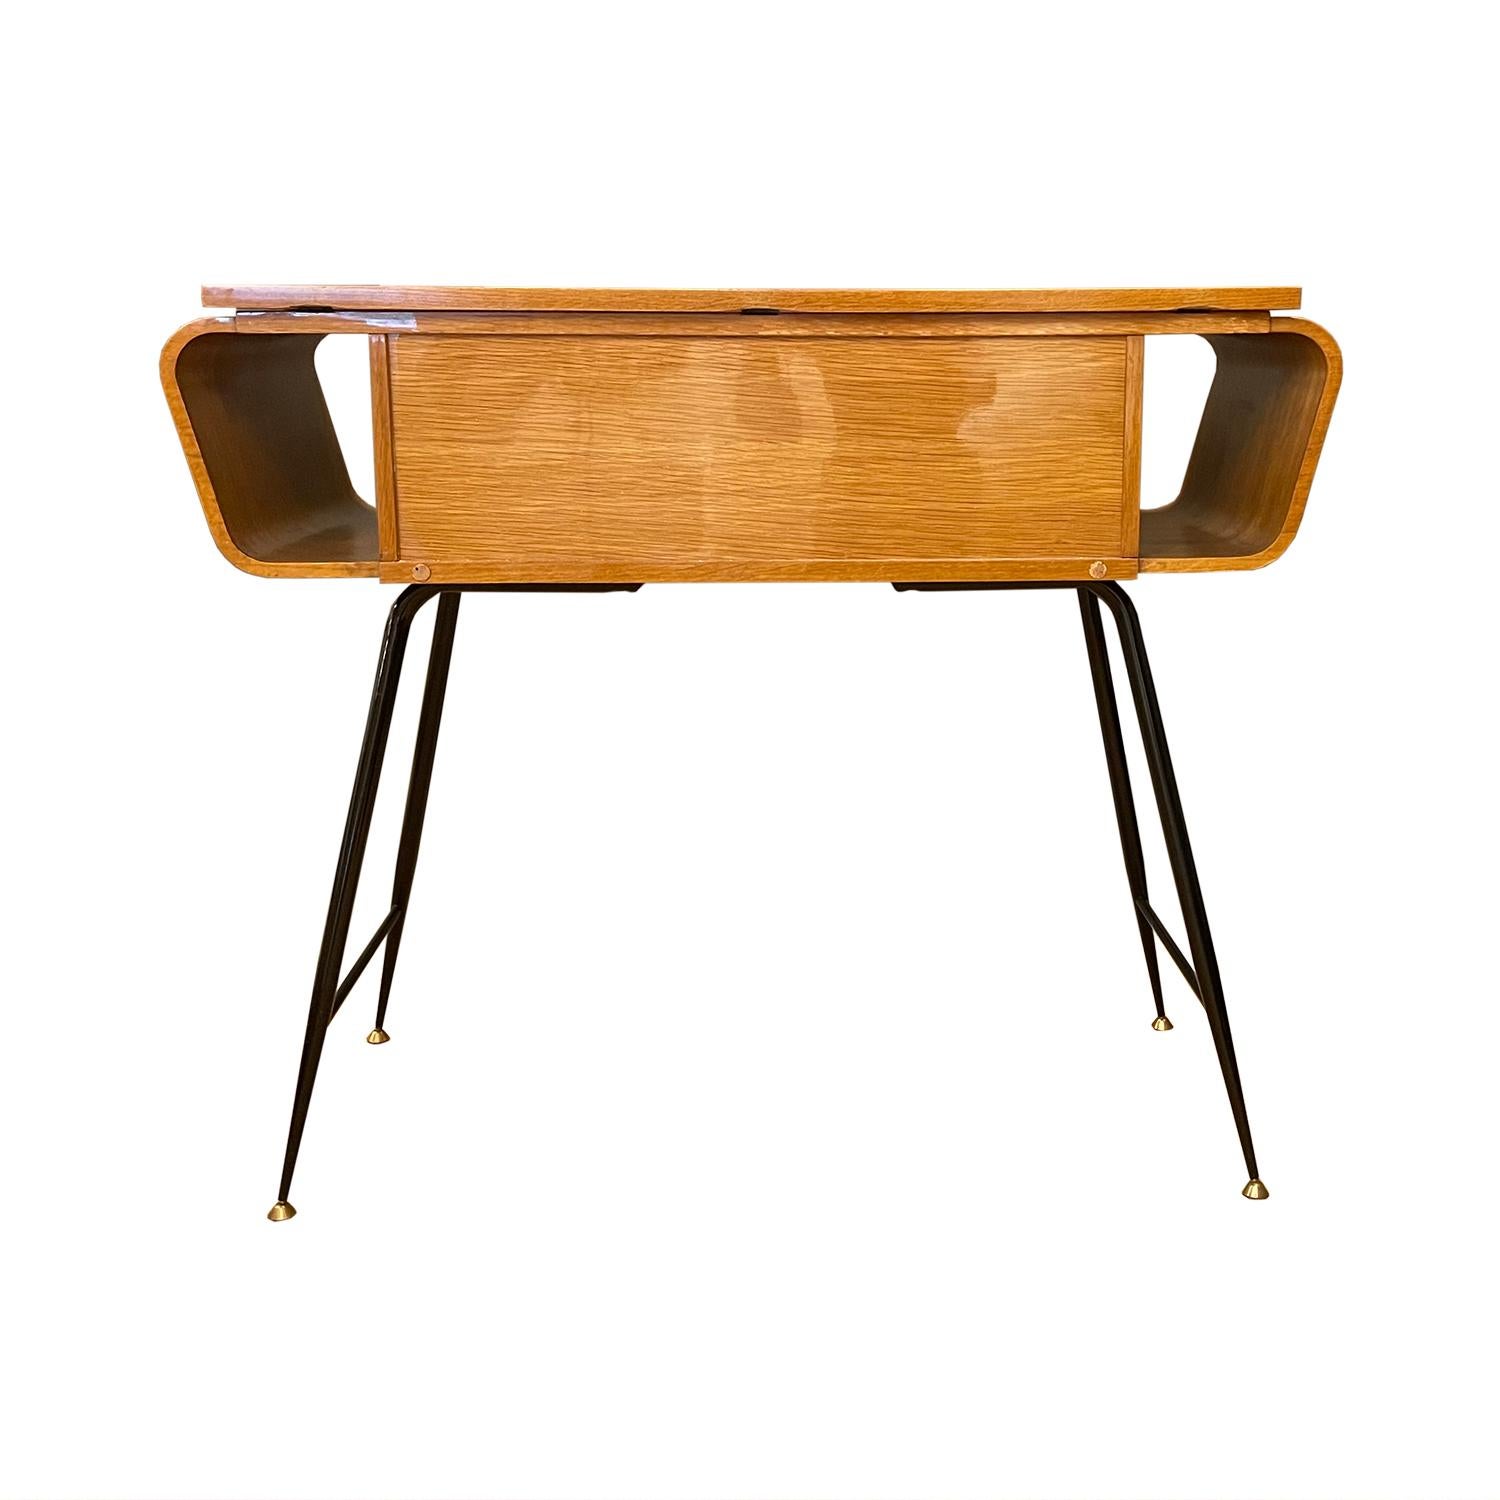 A vintage Mid-Century Modern Italian console table with two small, push out drawers, made of hand carved lacquered veneered Walnut, in good condition. The side, free standing table is standing on four curved metal, brass spider legs, designed by Ico